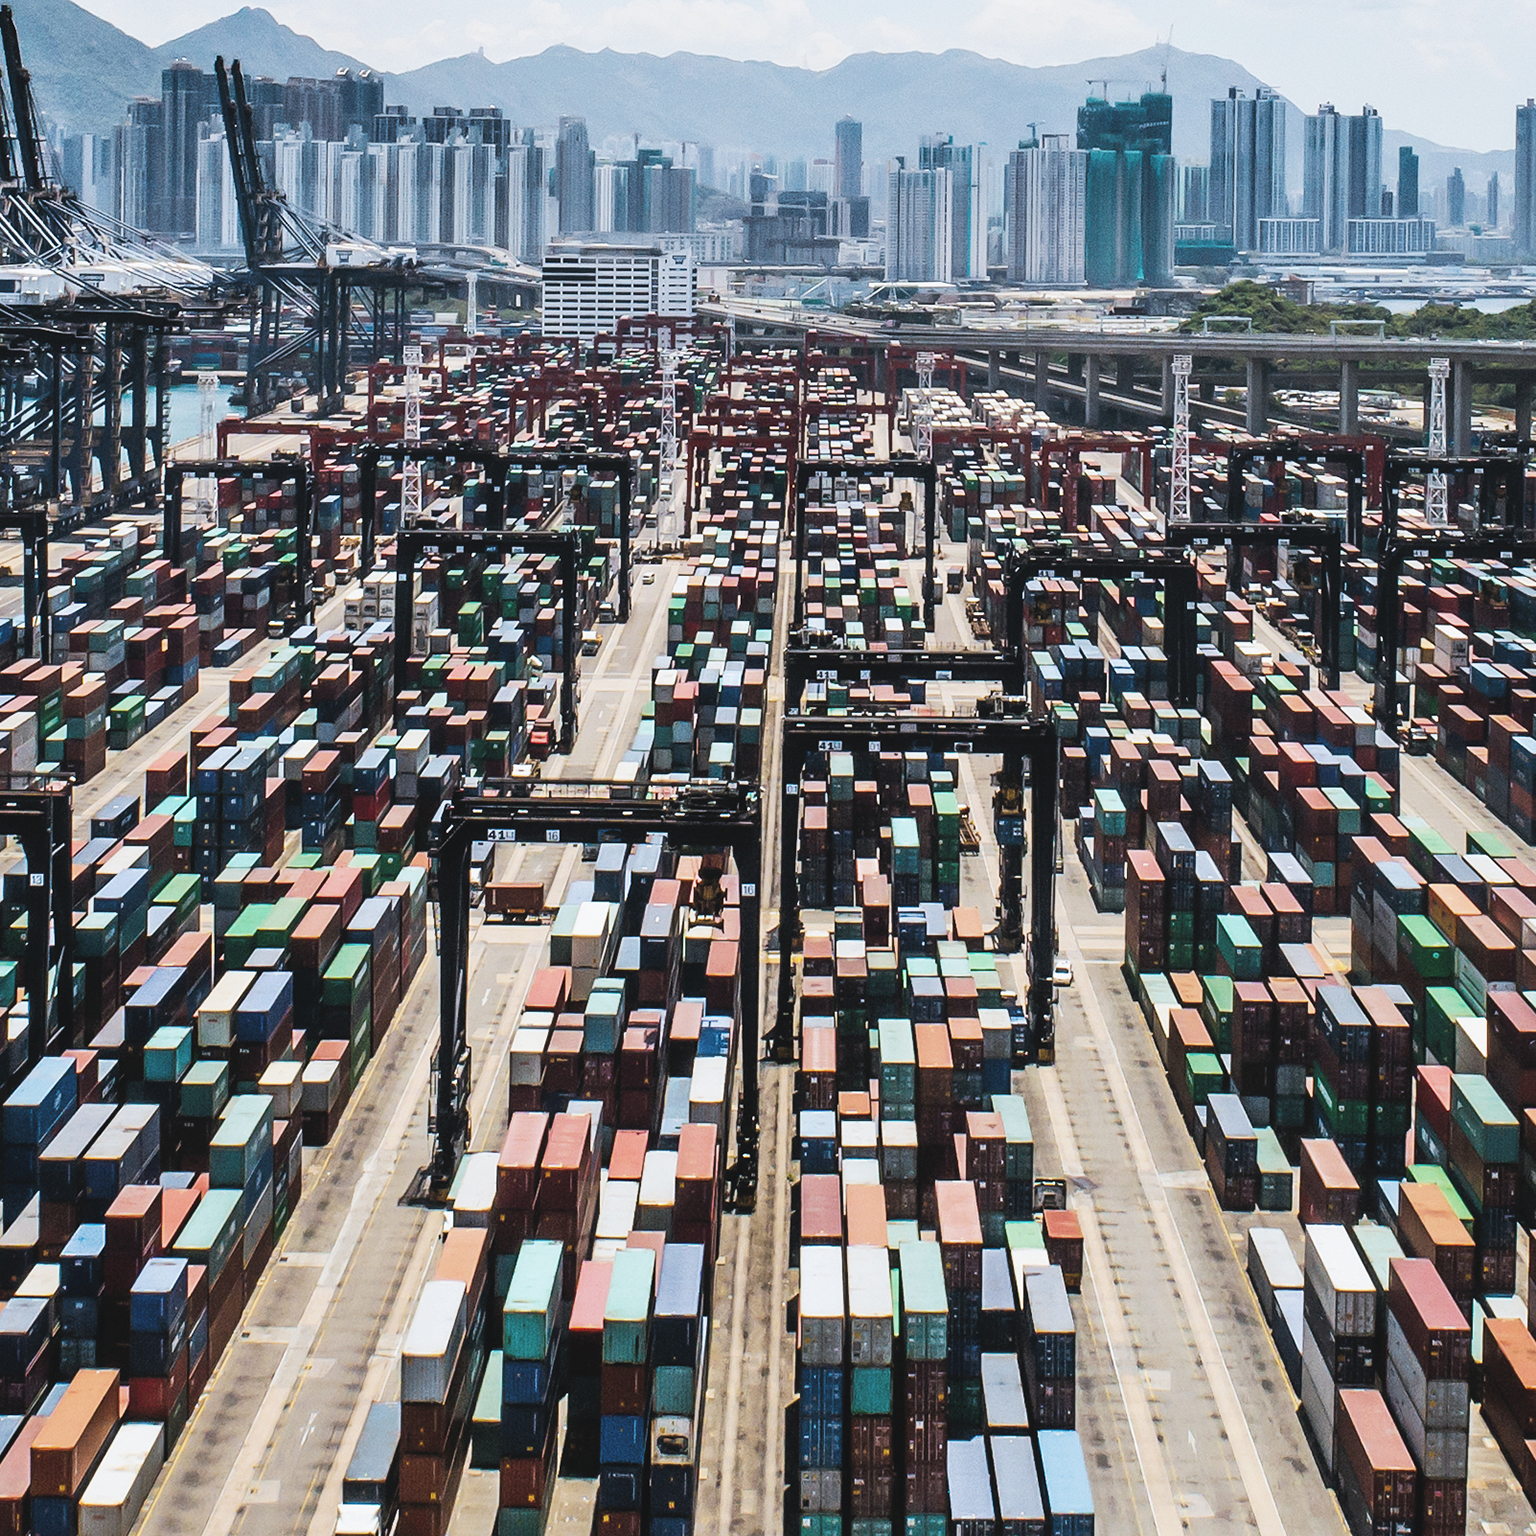 Asia: The highway of value for global logistics